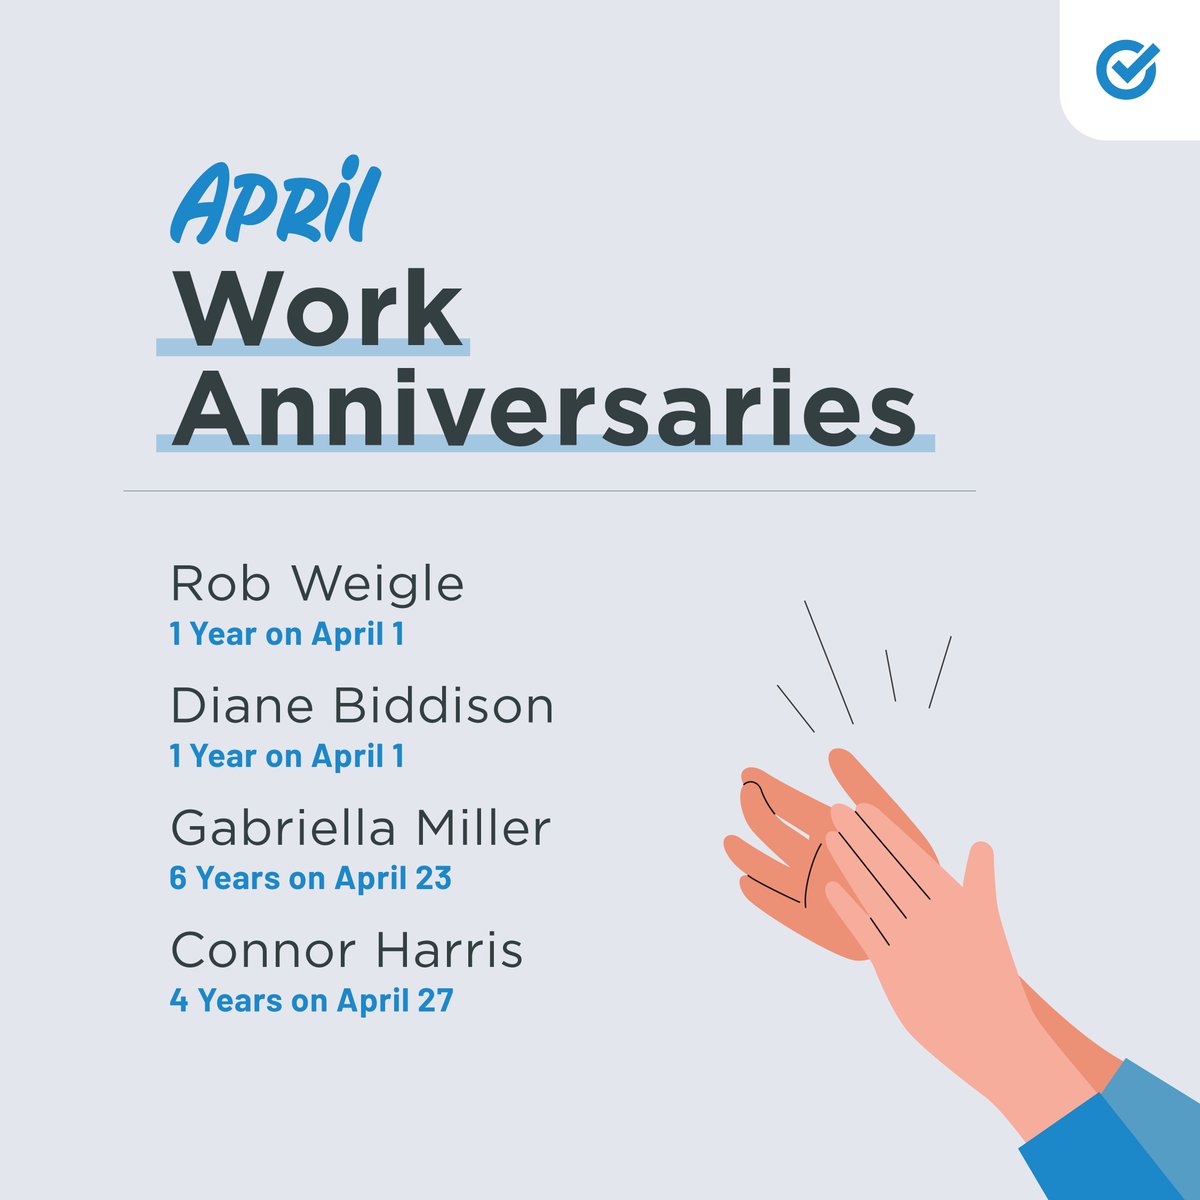 Congrats and well done to those celebrating work anniversaries this month! #workanniversary #teamnowdx #nowdx